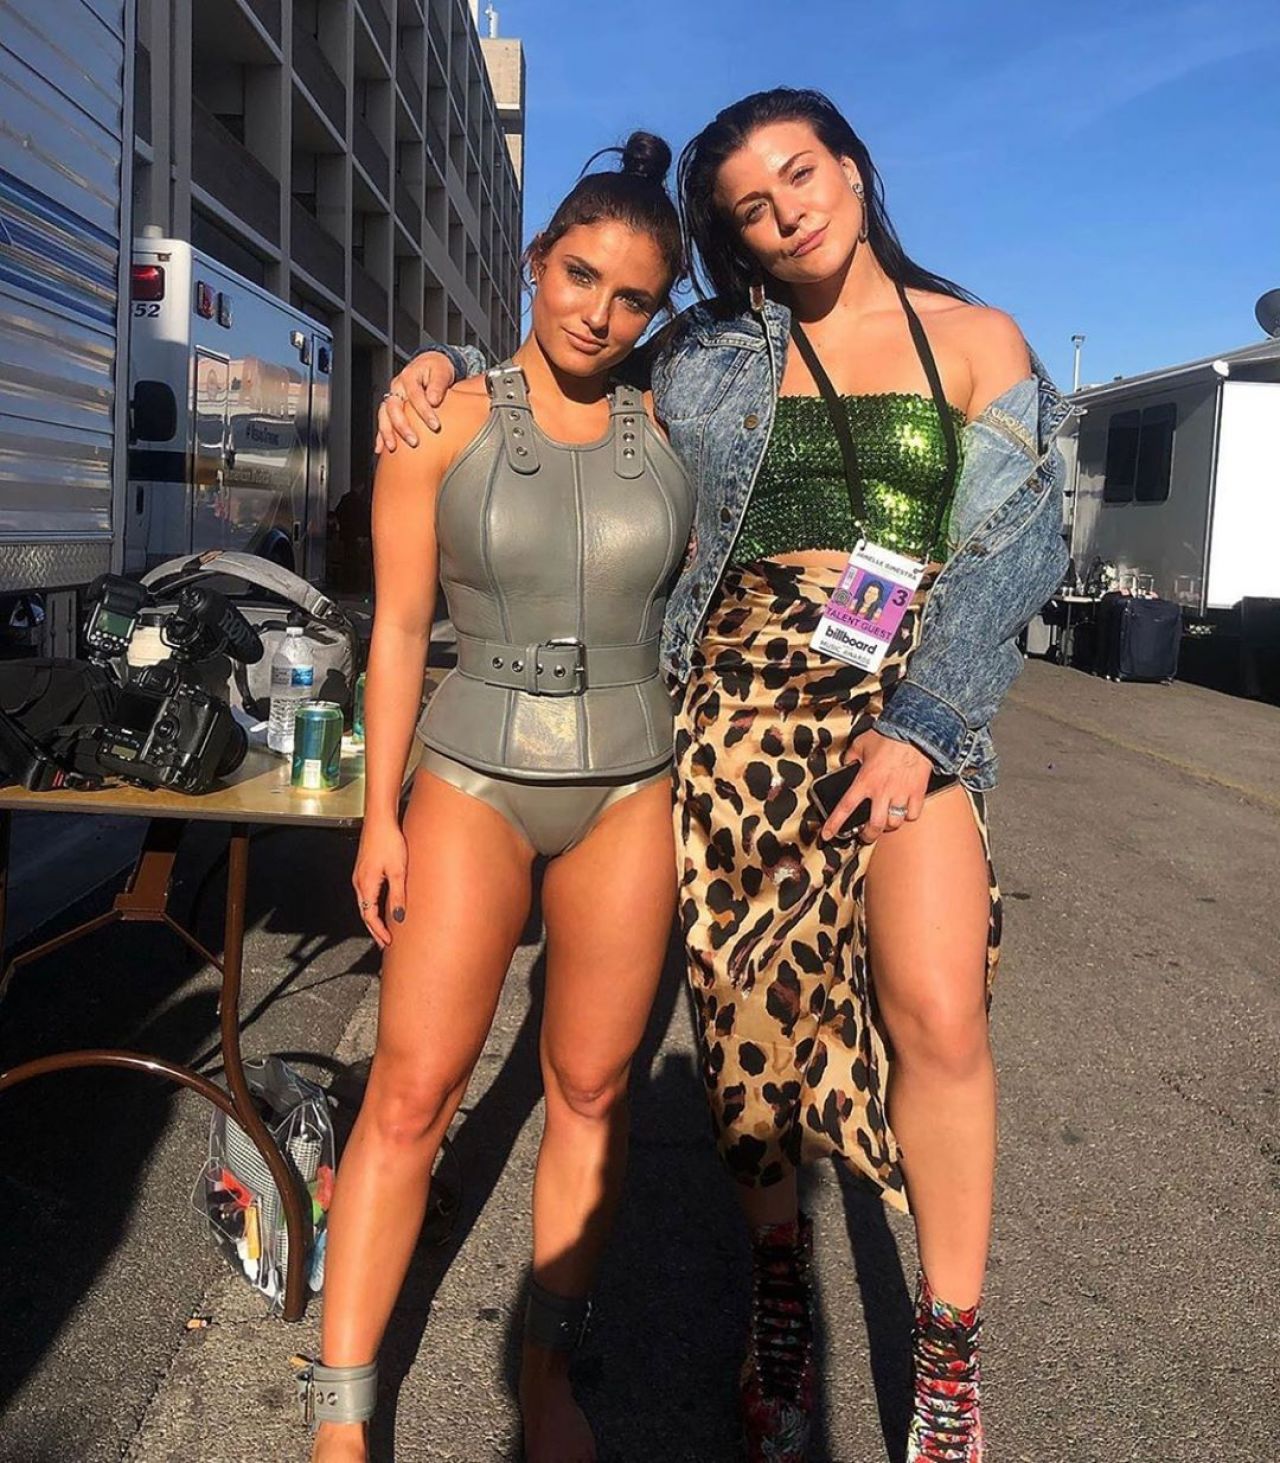 Jade Chynoweth Style Clothes Outfits And Fashion Of